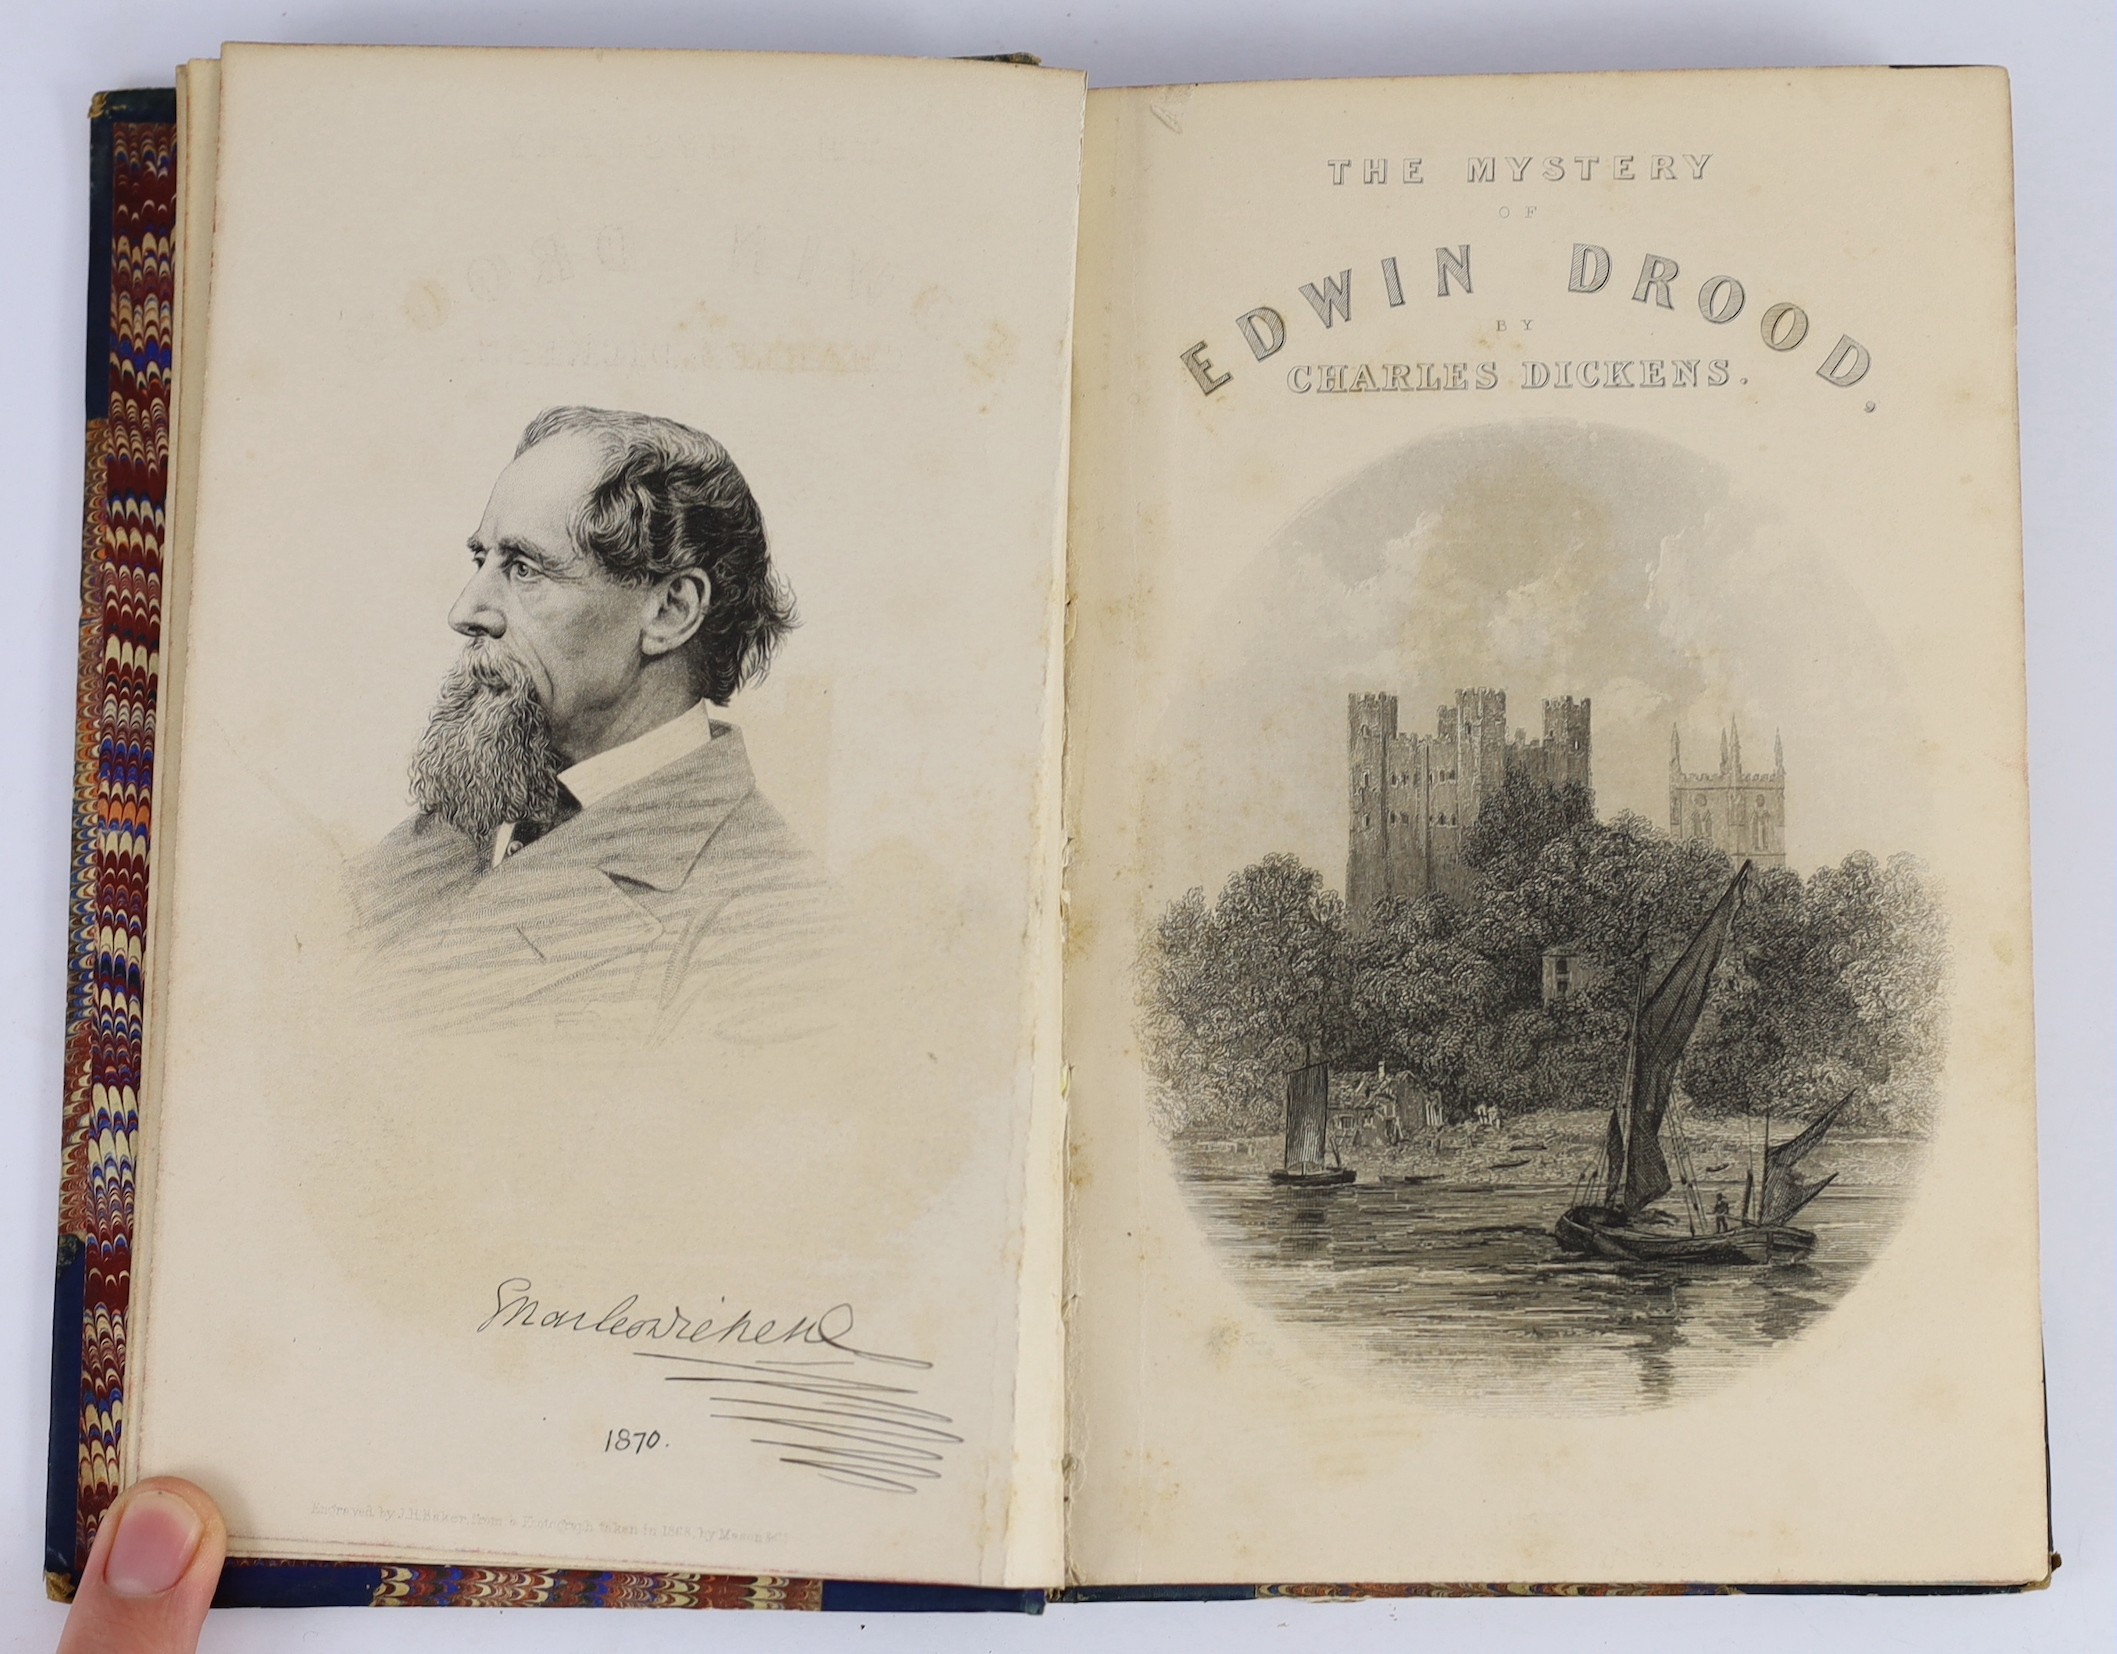 Dickens, Charles - The Mystery of Edwin Drood, 1st edition in book form, 3 vols, 8vo, quarter calf with marbled boards, illustrated with portrait, title and 12 plates by Samuel Luke Fildes, ink ownership inscription to f